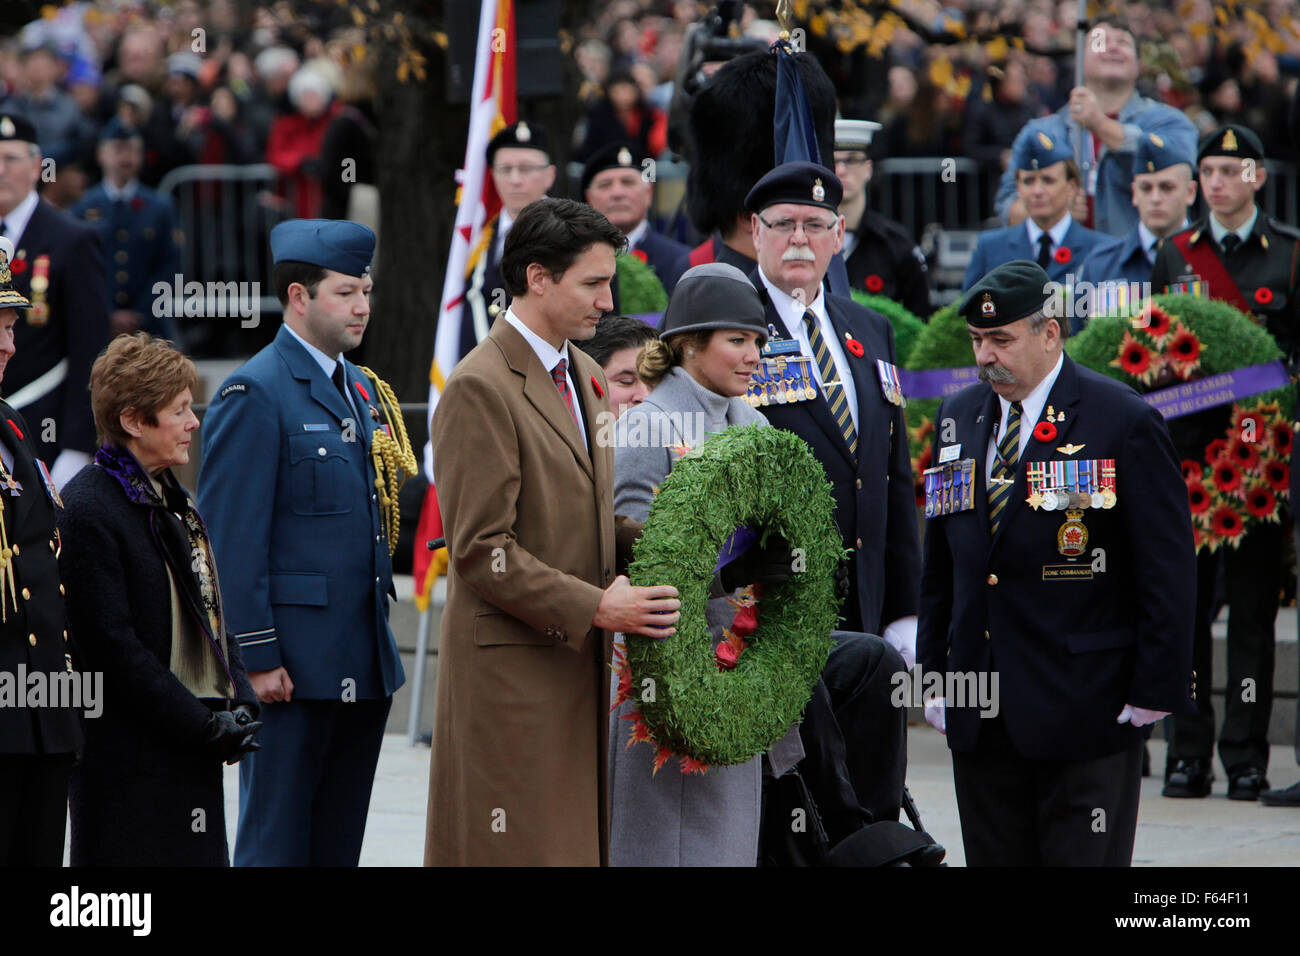 Ottawa, Canada. 11th Nov, 2015. Canada's Prime Minister Justin Trudeau and his wife Sophie lay a wreath at the National War Memorial in Ottawa, Canada, on Nov. 11, 2015. Every year on Nov. 11, Canadians reflect honour their war veterans and fallen soldiers by wearing a poppy and observing a moment of silence on the 11th minute of the 11th hour. Credit:  David Kawai/Xinhua/Alamy Live News Stock Photo